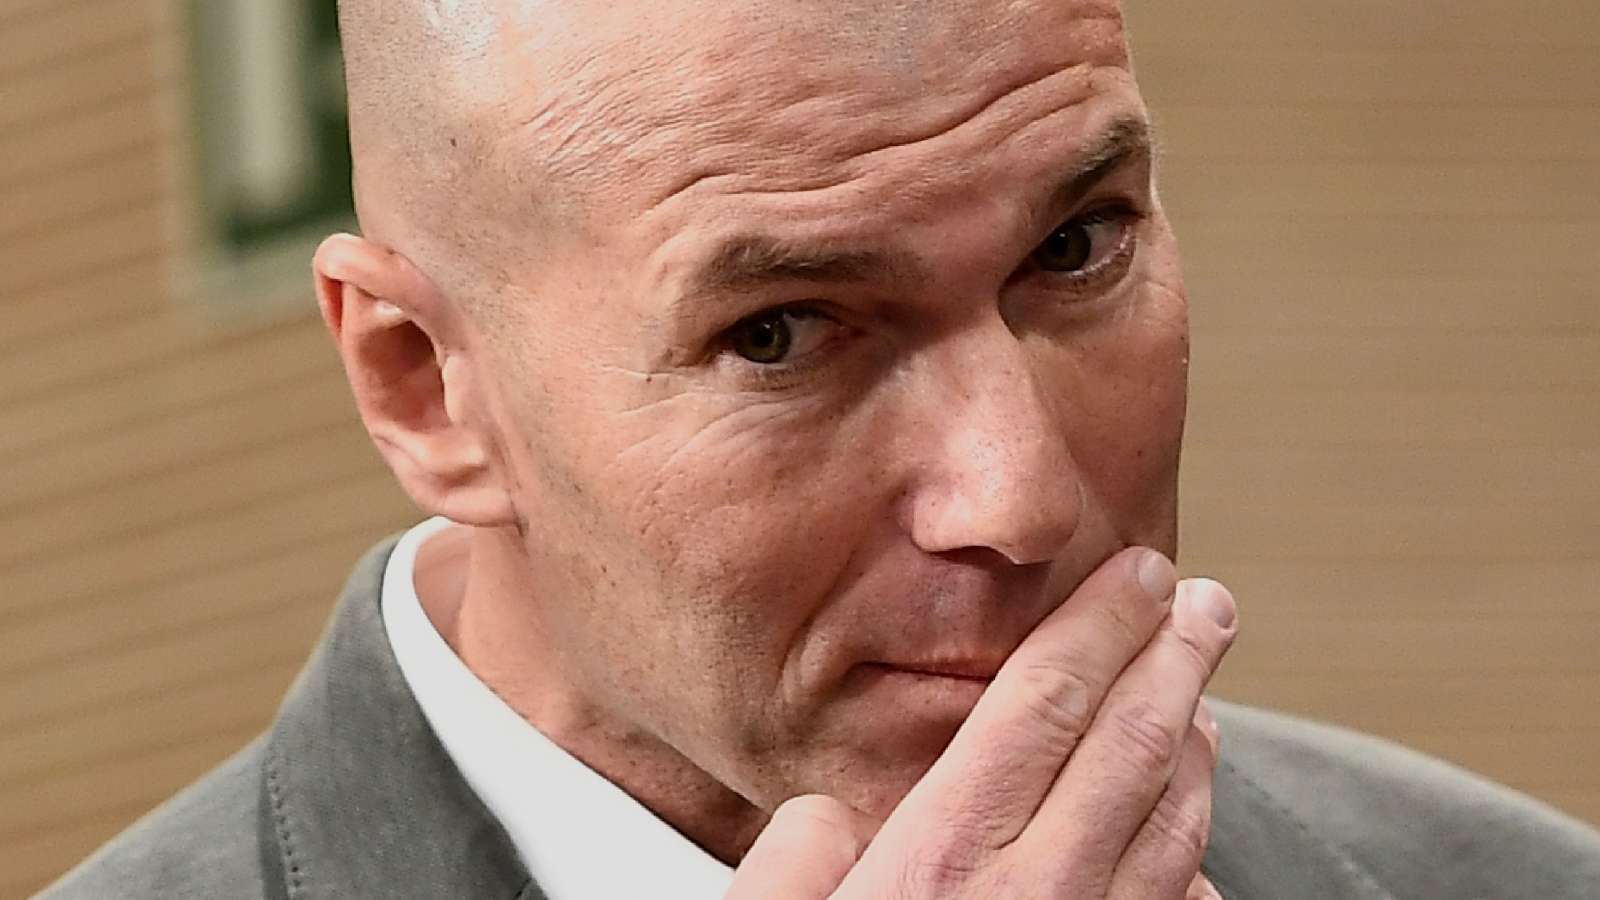 Zidane agreed to return to Real Madrid